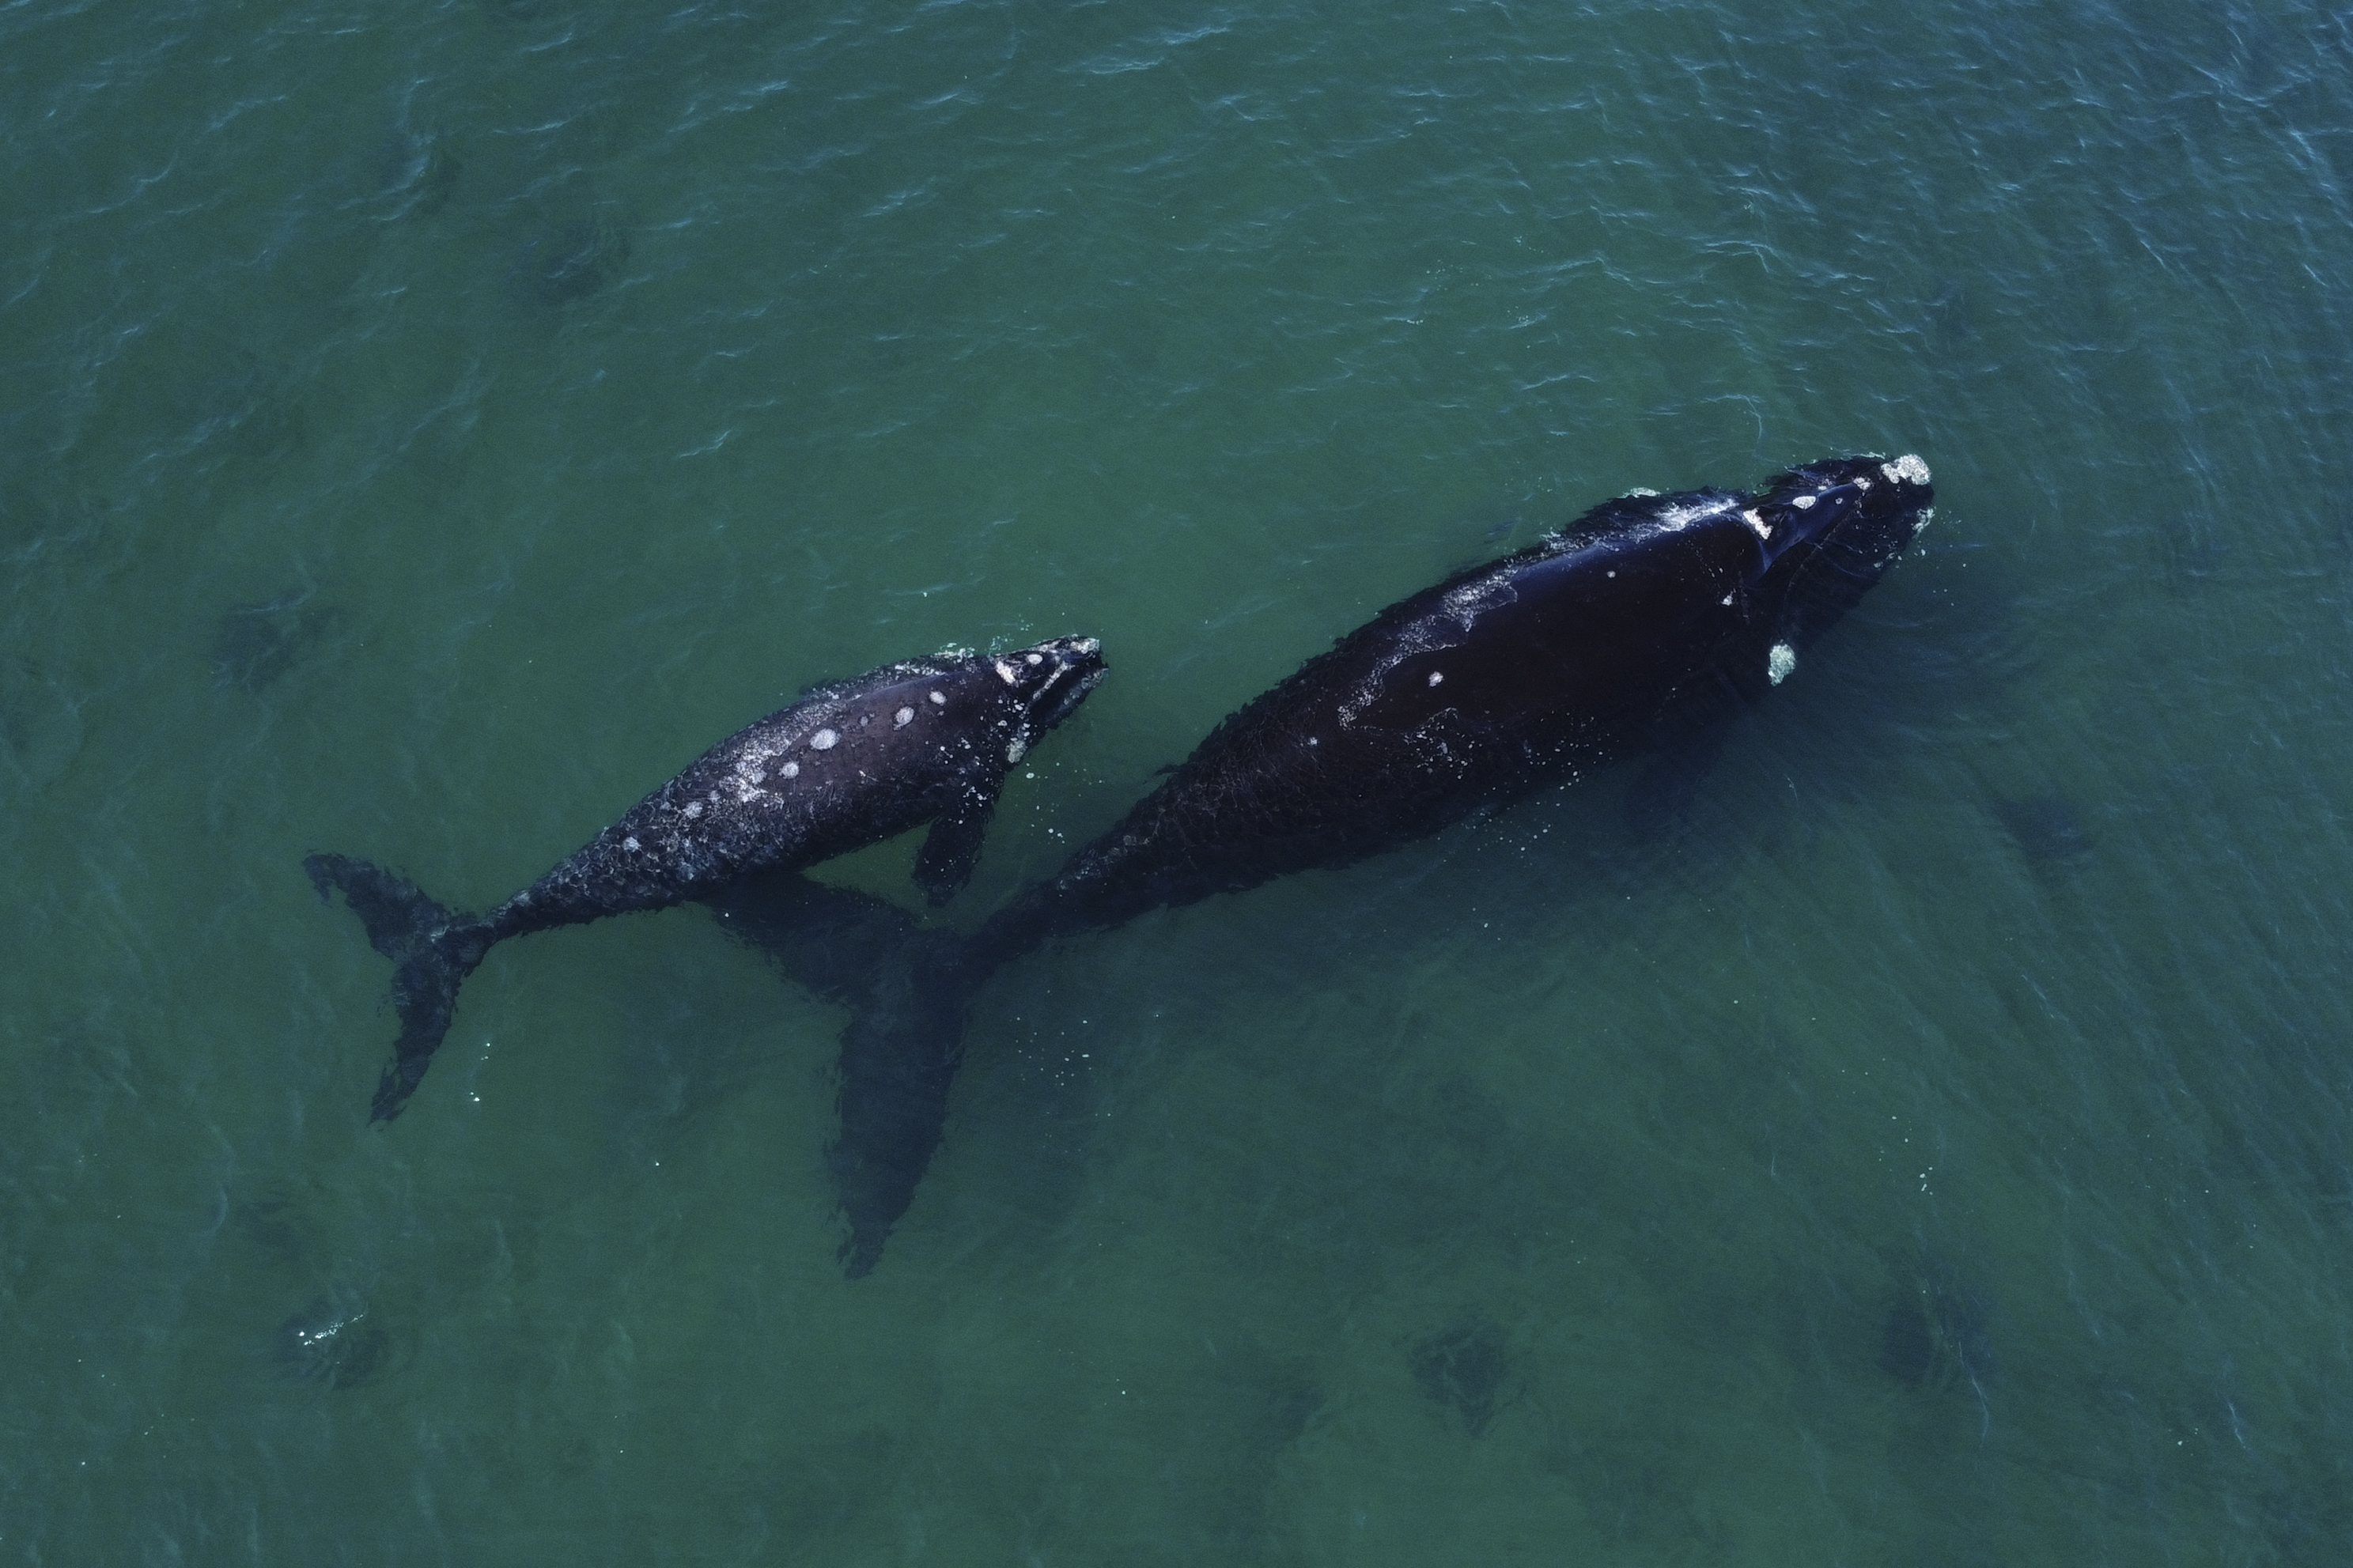 Two whales swimming, seen from above.